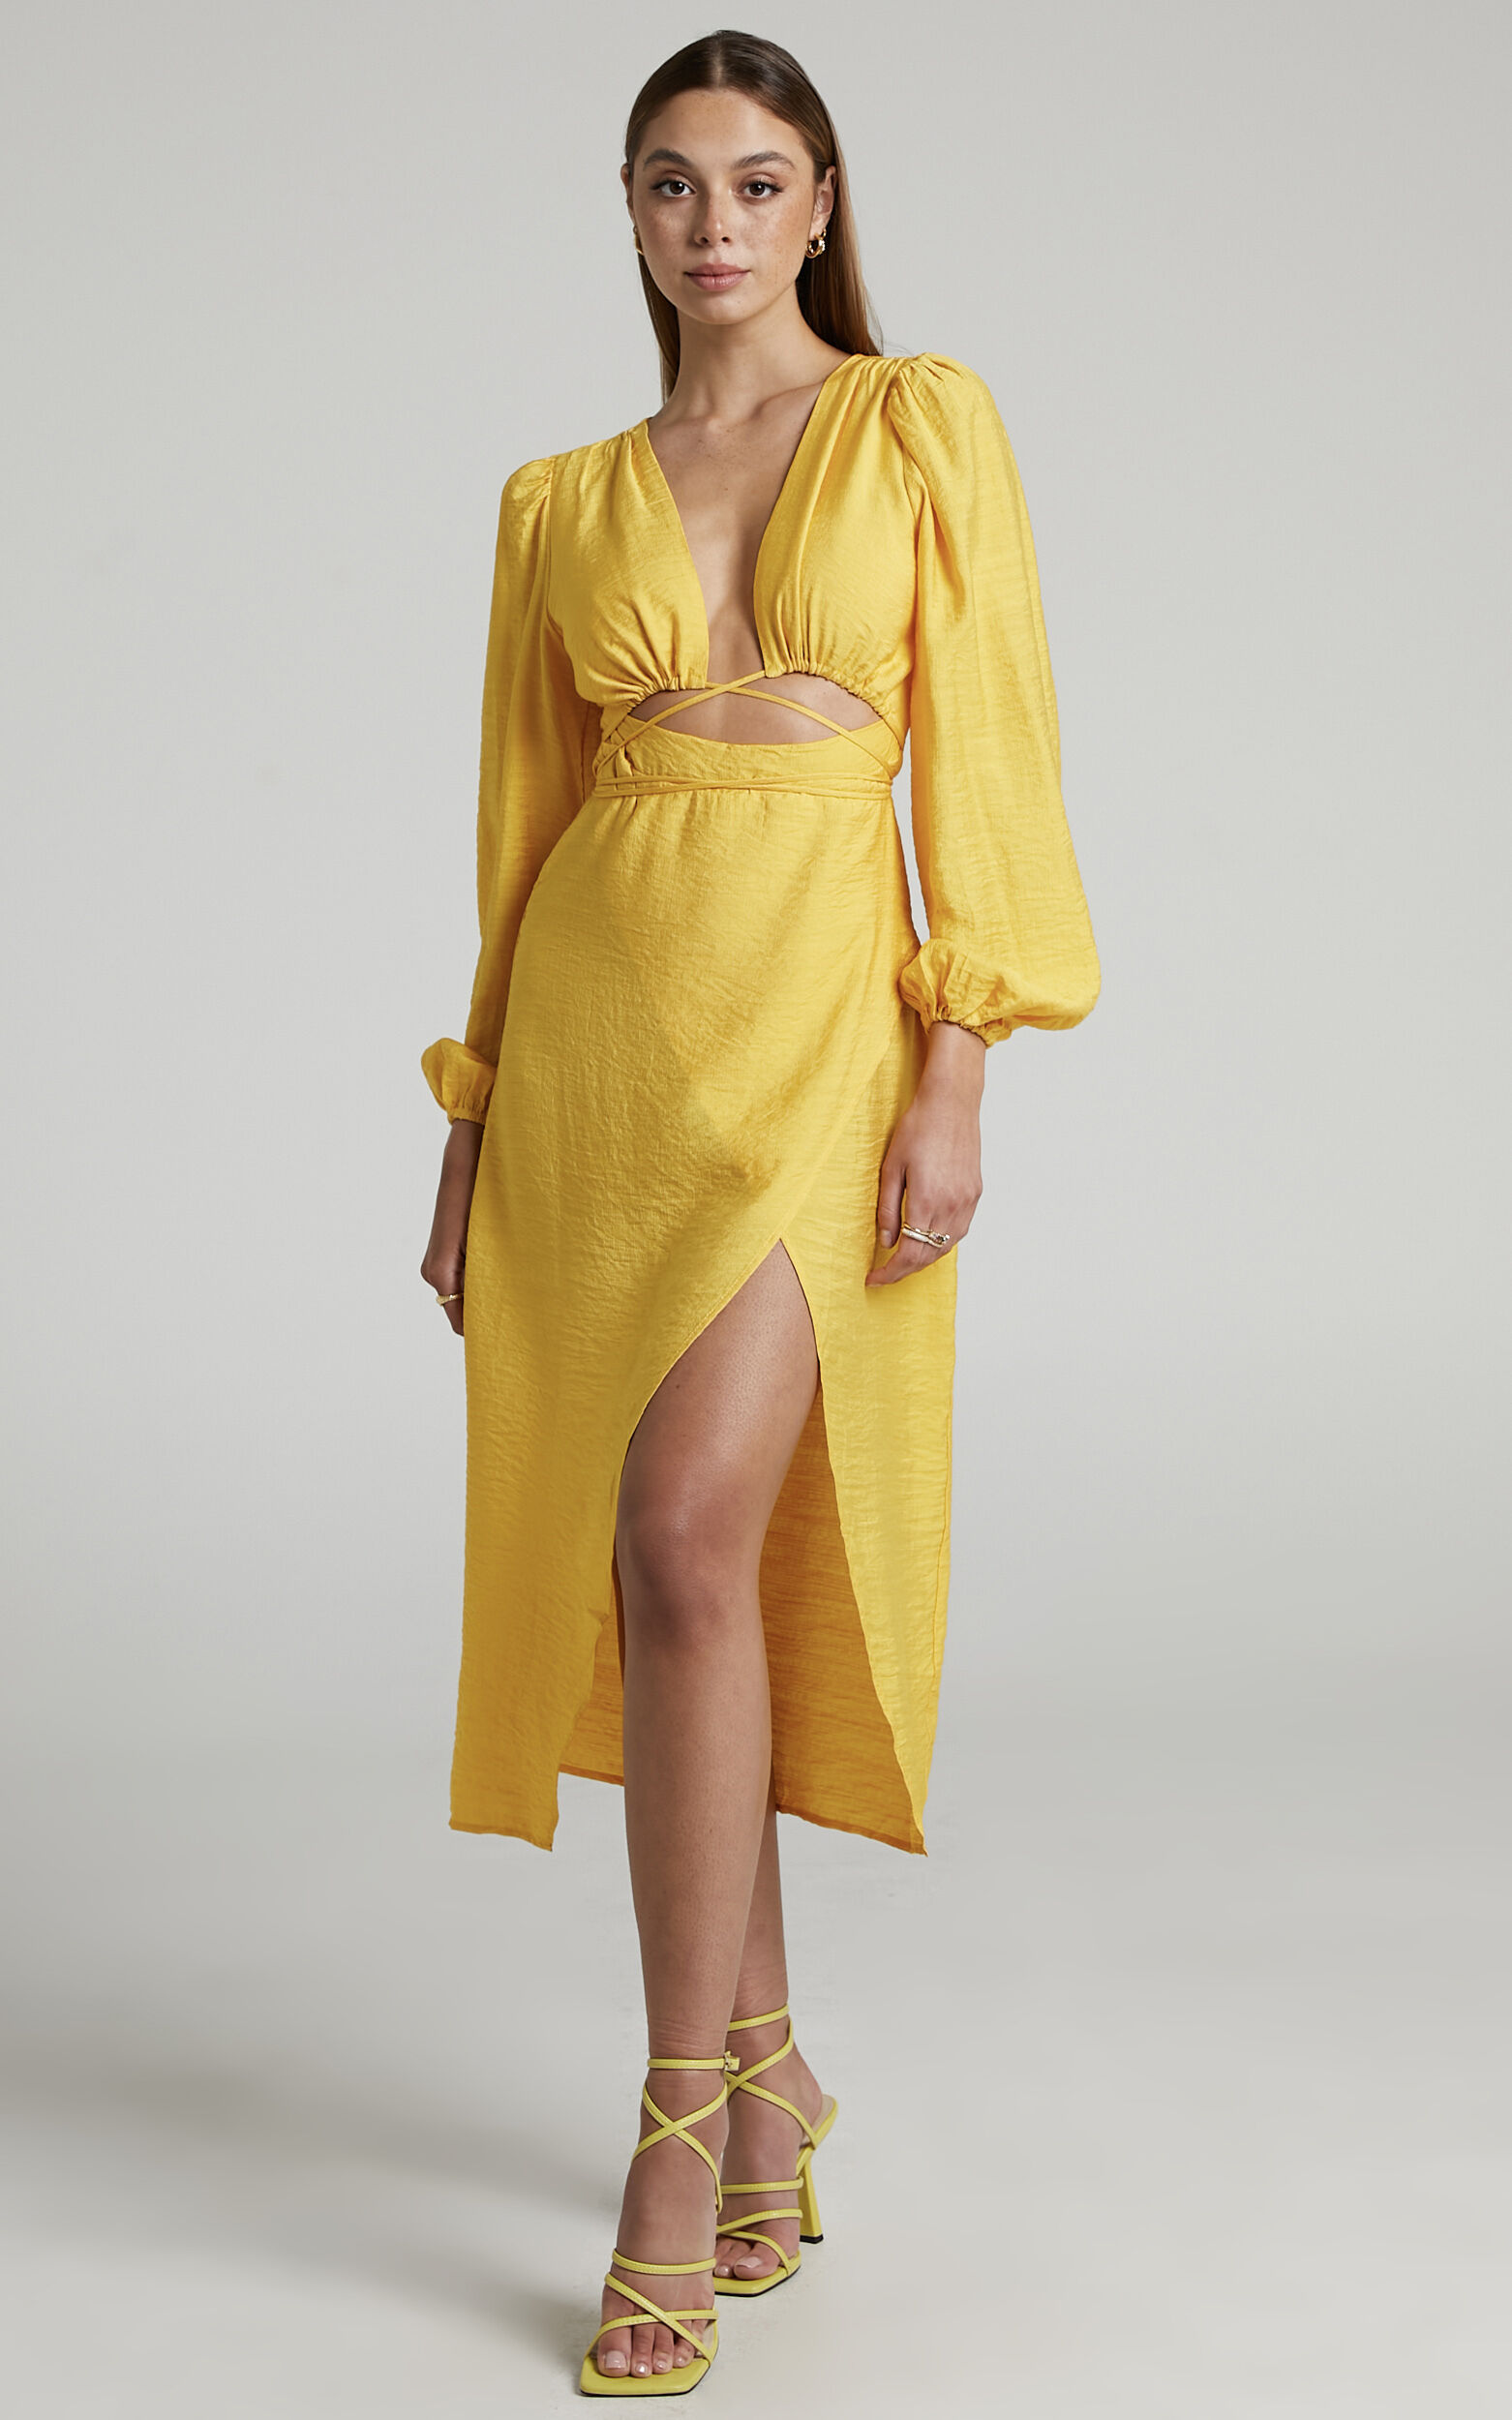 Demieh Front Cut Out Long Sleeve Midi Dress in Bright Yellow - 04, YEL1, super-hi-res image number null